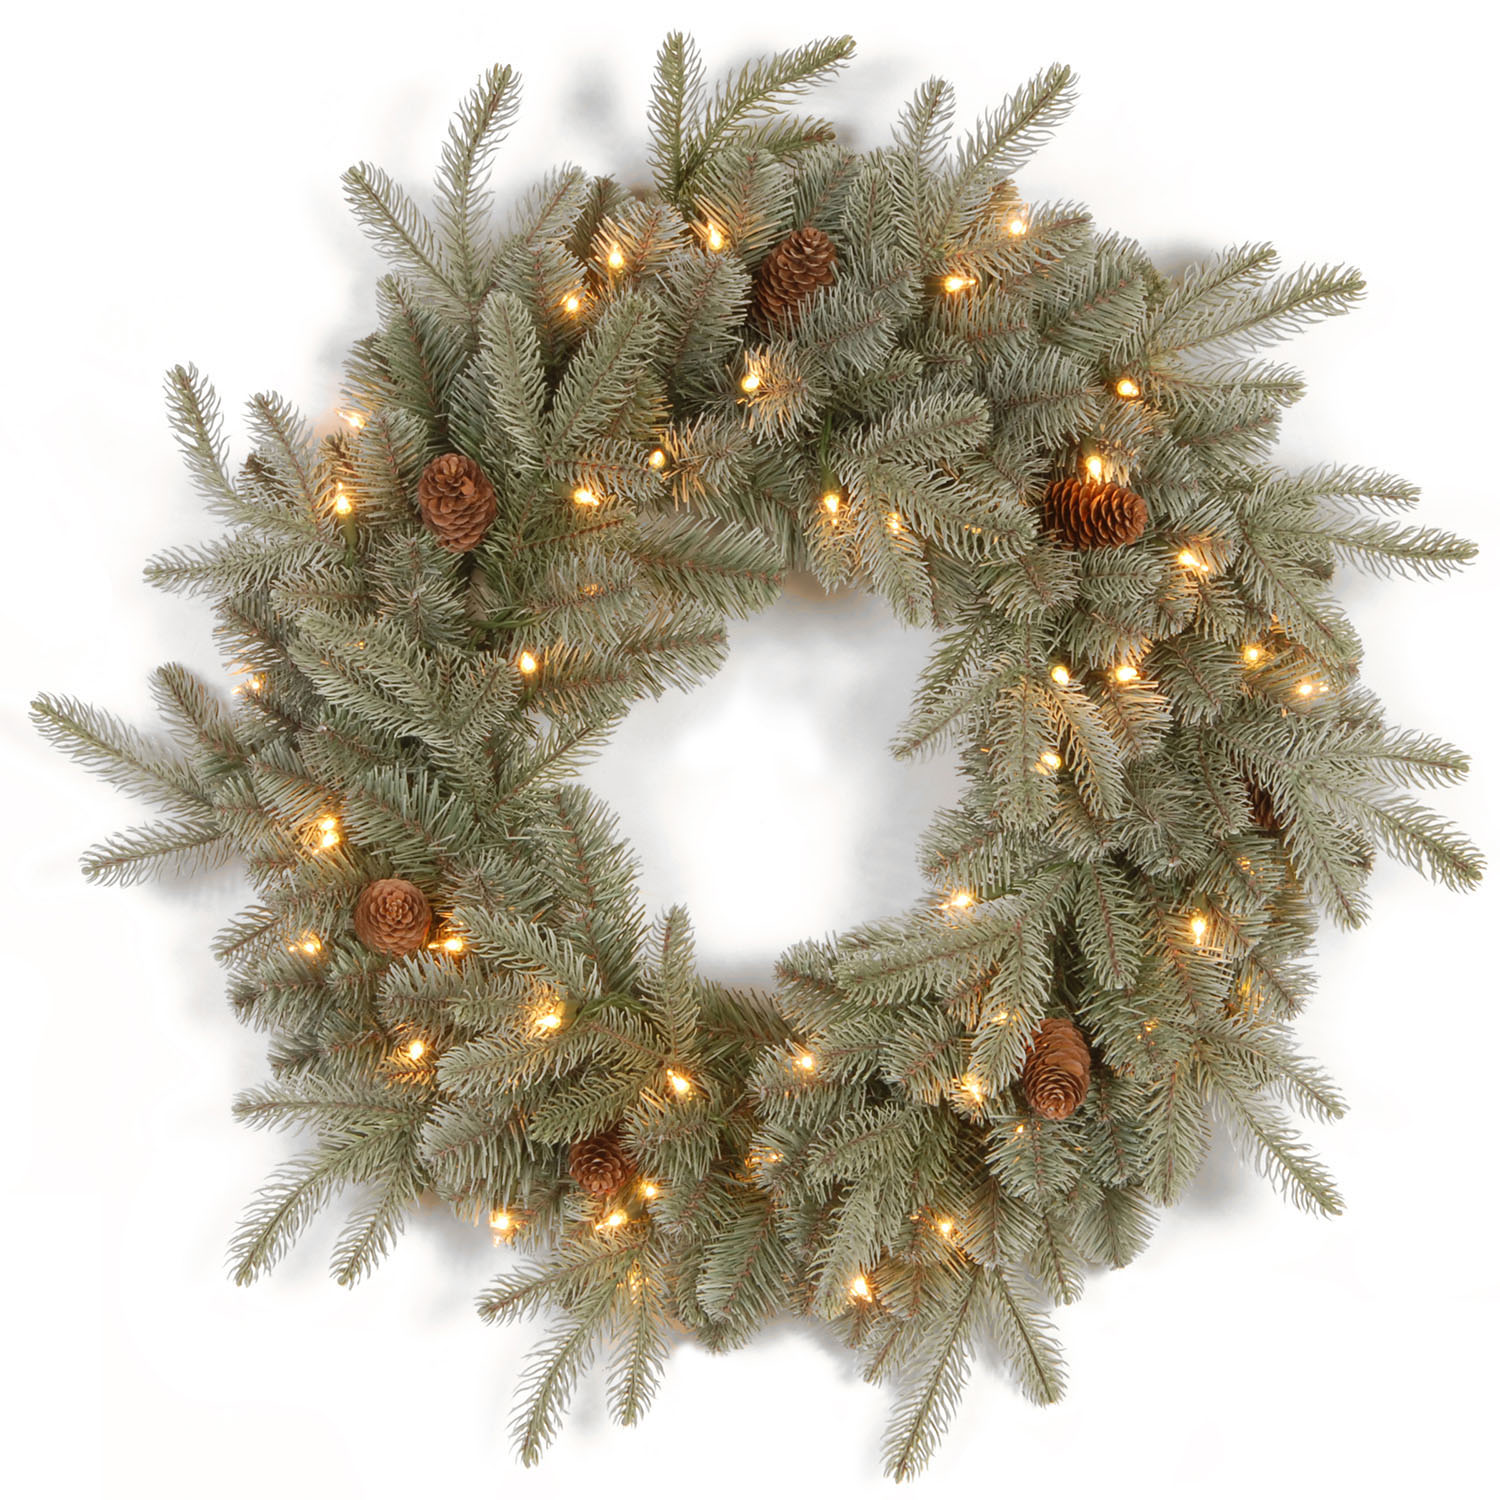 24 Inch Pe/pvc Frosted Artic Spruce Wreath With Cones: Clear Lights